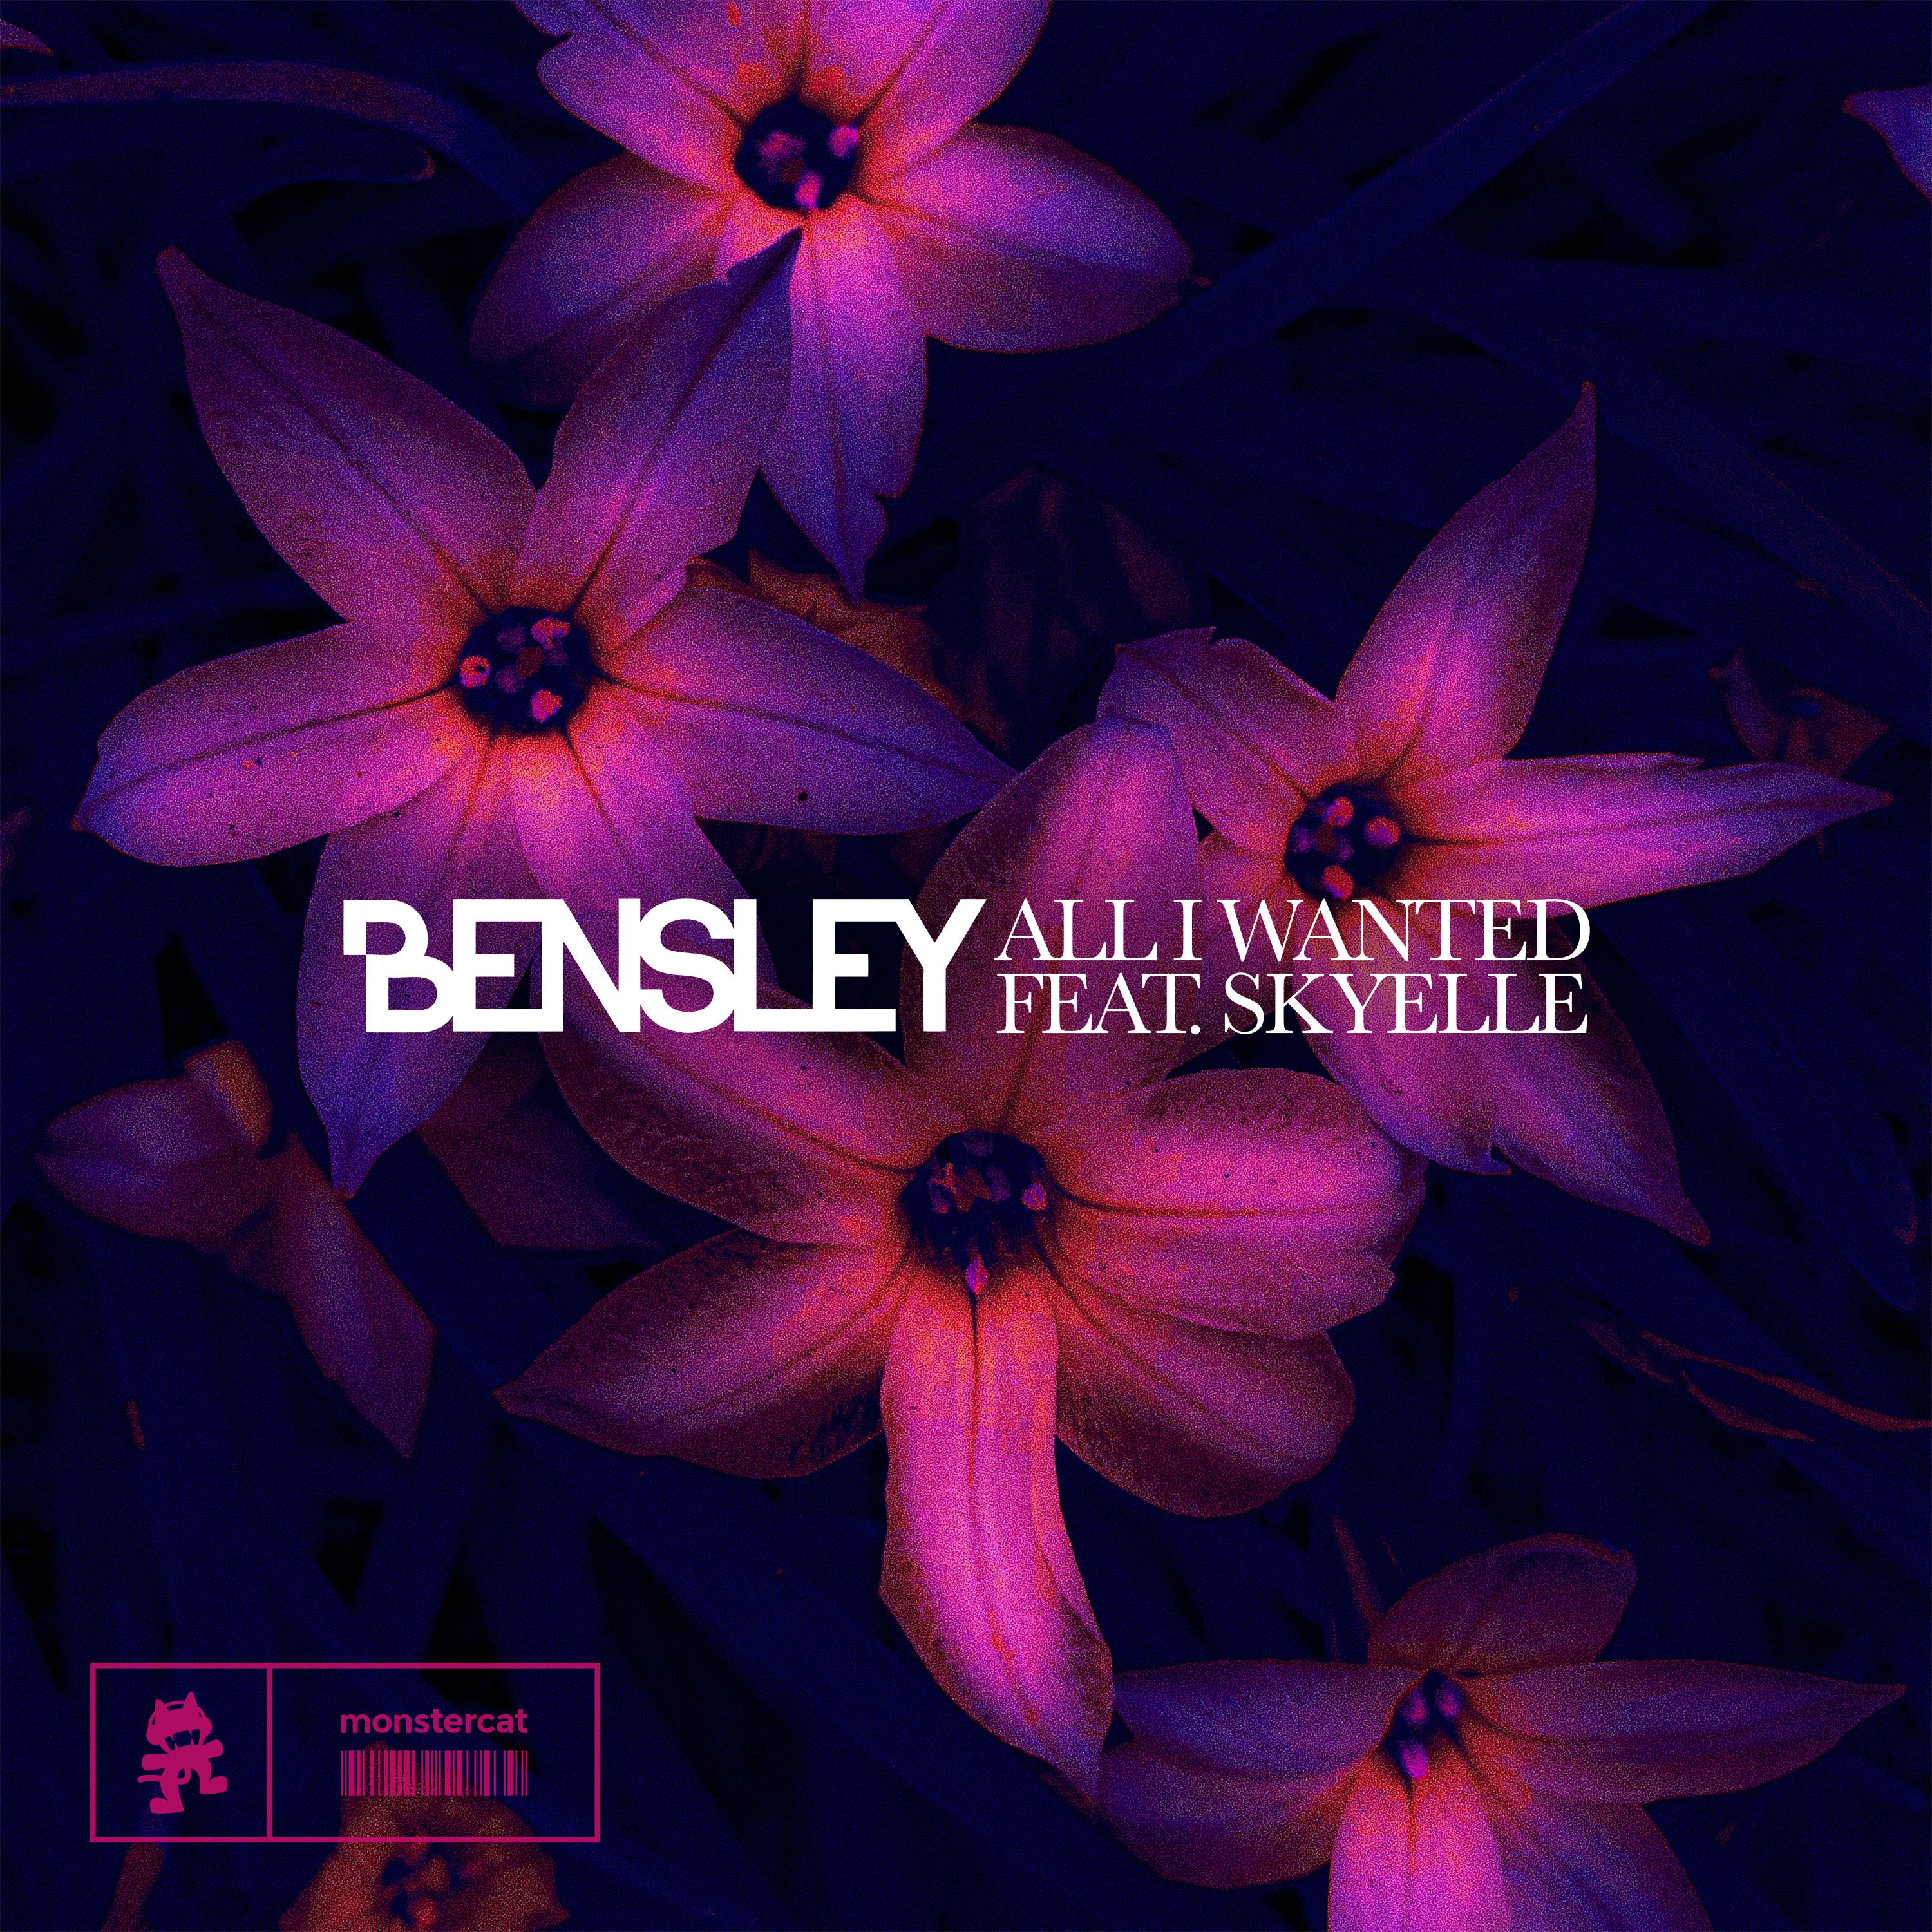 Bensley - All I Wanted